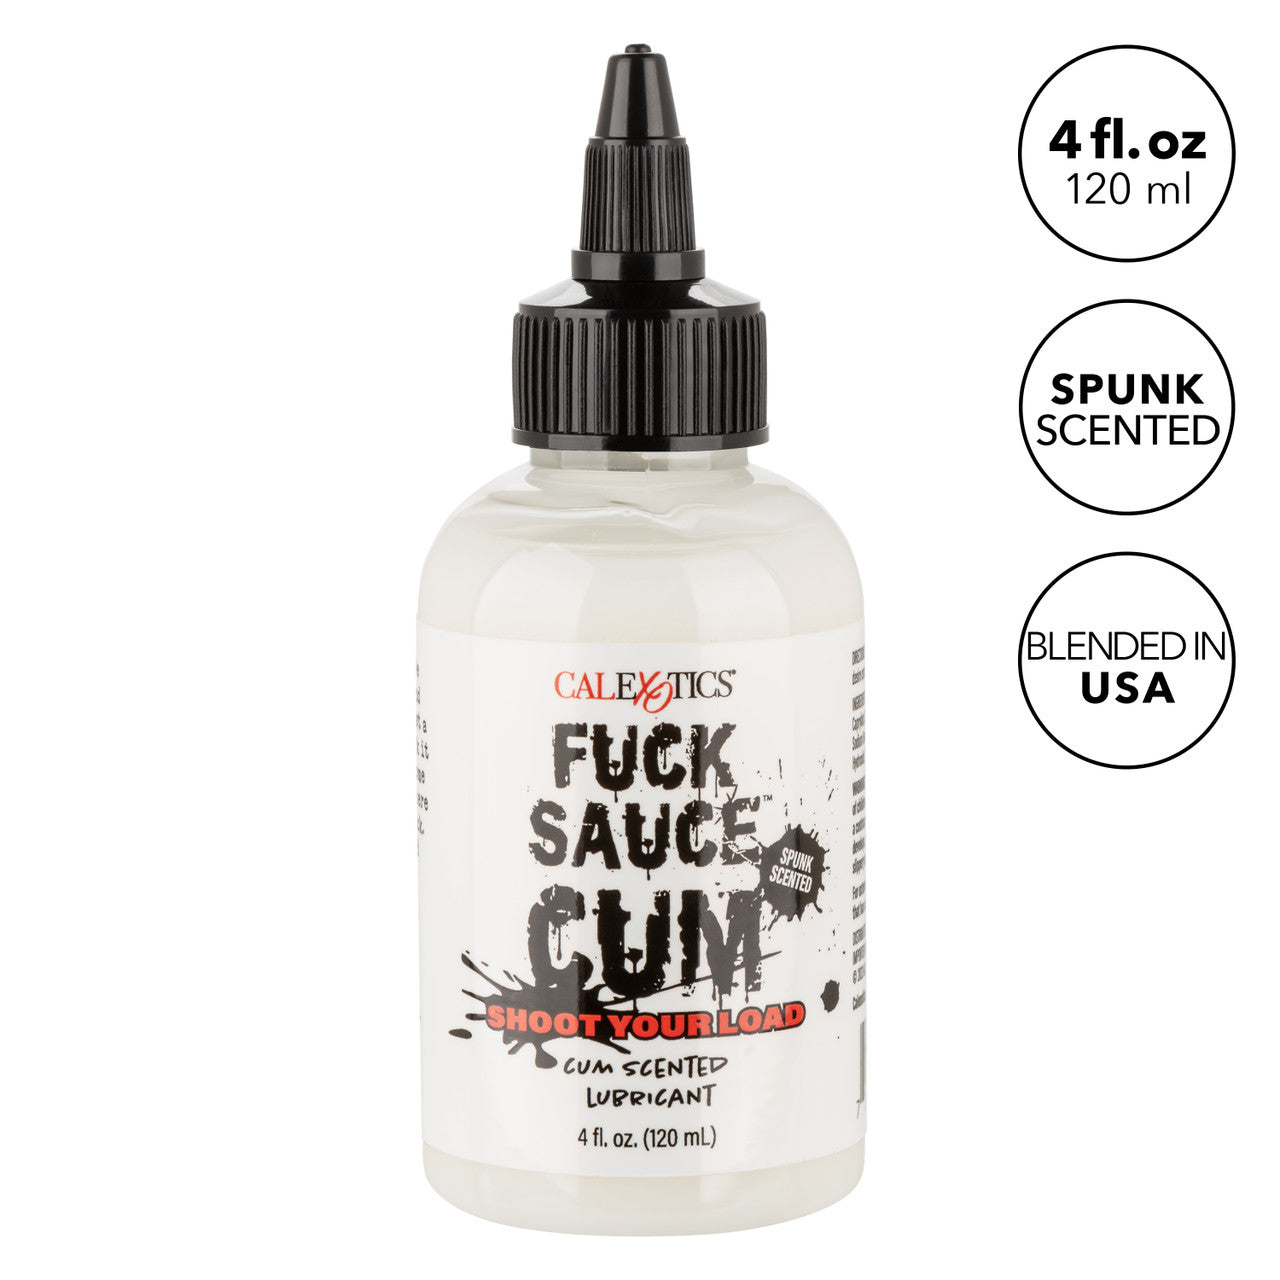 Fuck Sauce Cum Scented Lubricant - 4 fl. oz. - Thorn & Feather